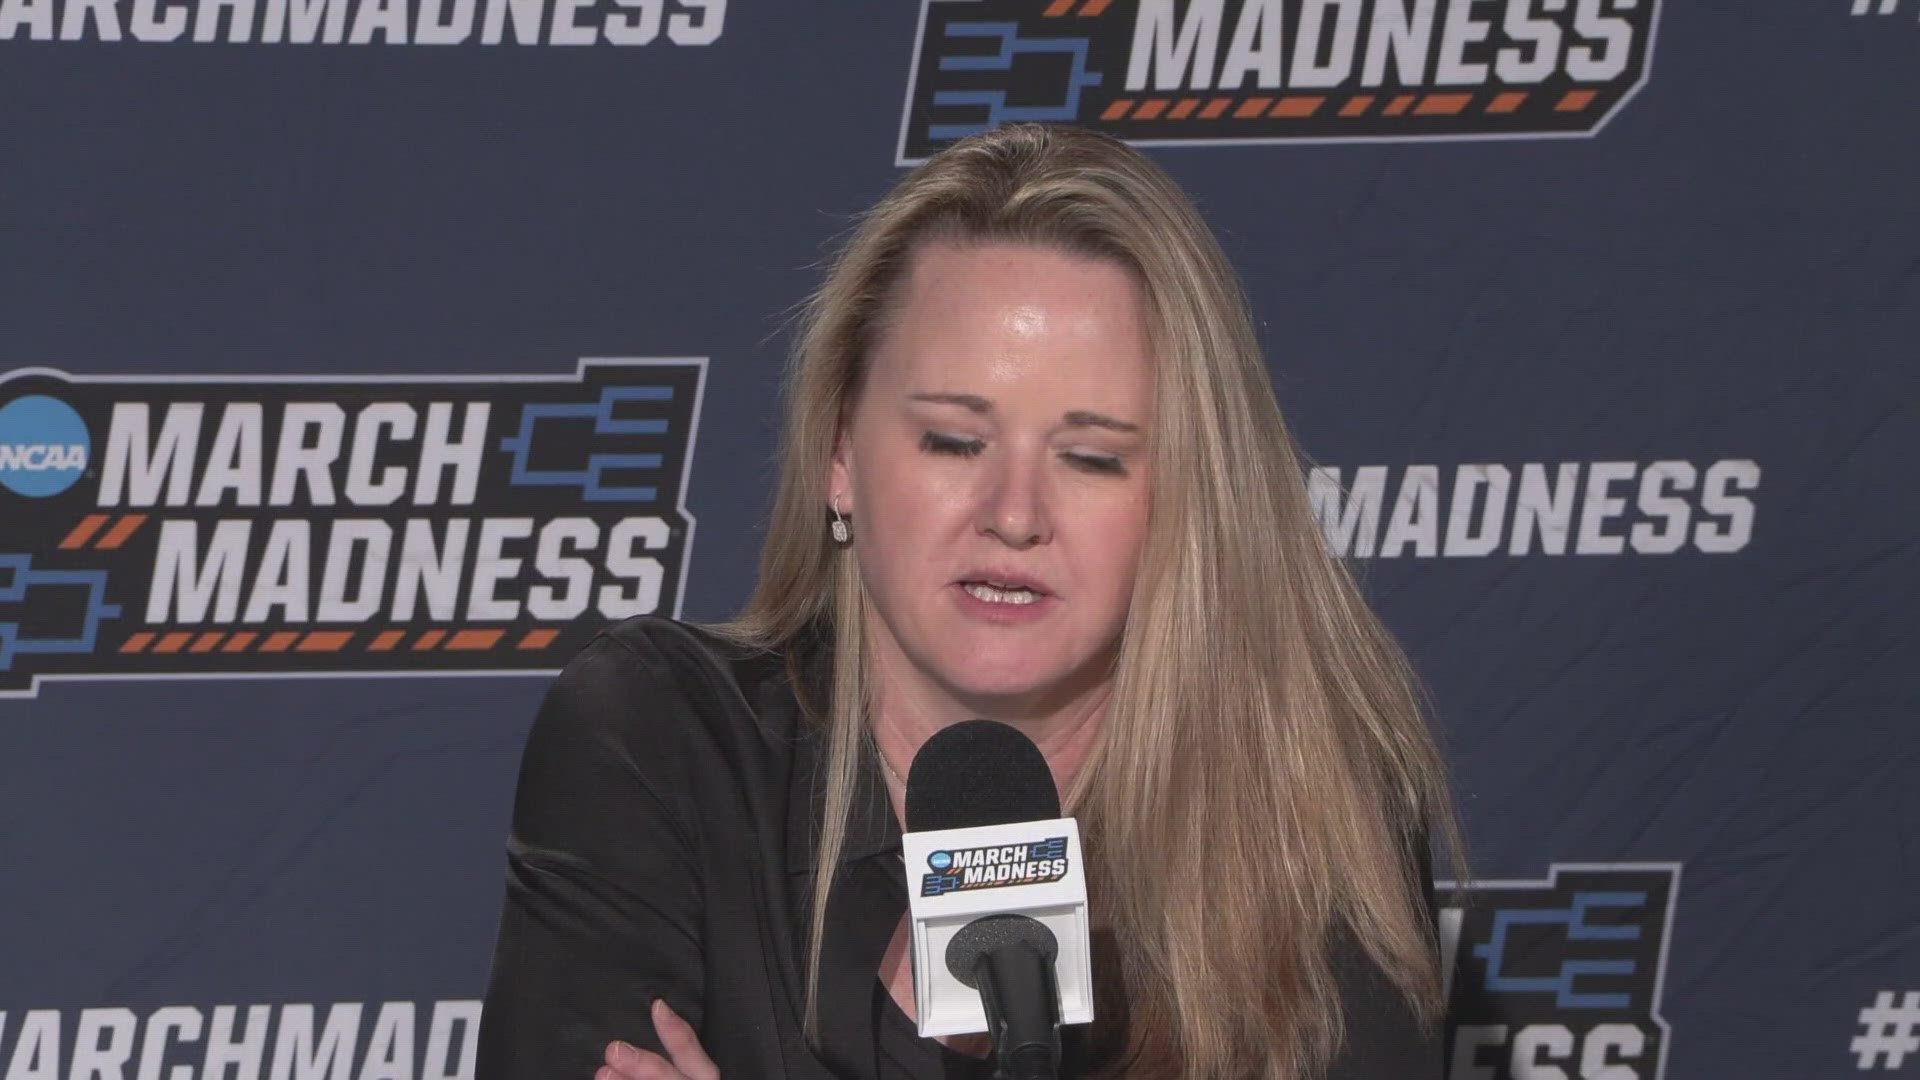 Allegations surfaced over the weekend that the Utah Women’s Basketball team faced racial abuse while staying in Coeur d’Alene for the NCAA Tournament.